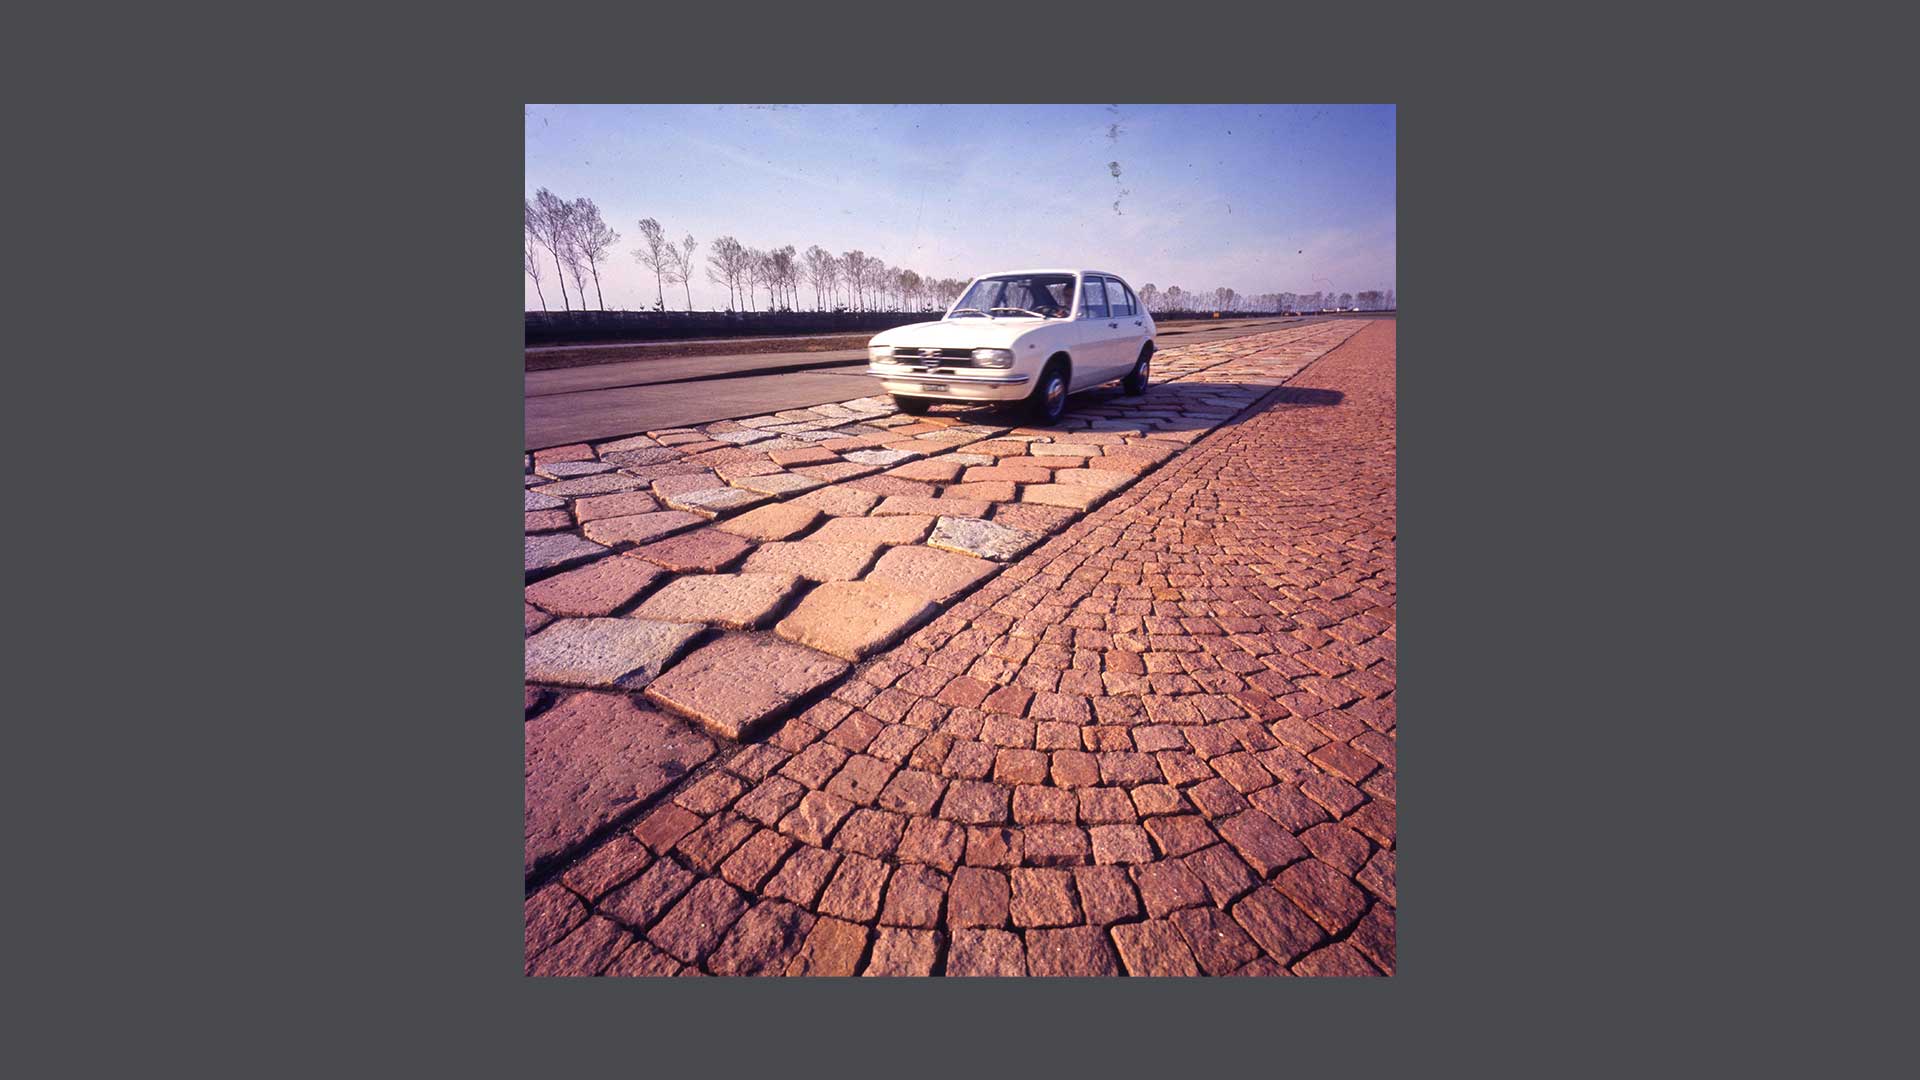 Historic photo of a white car on paved ground